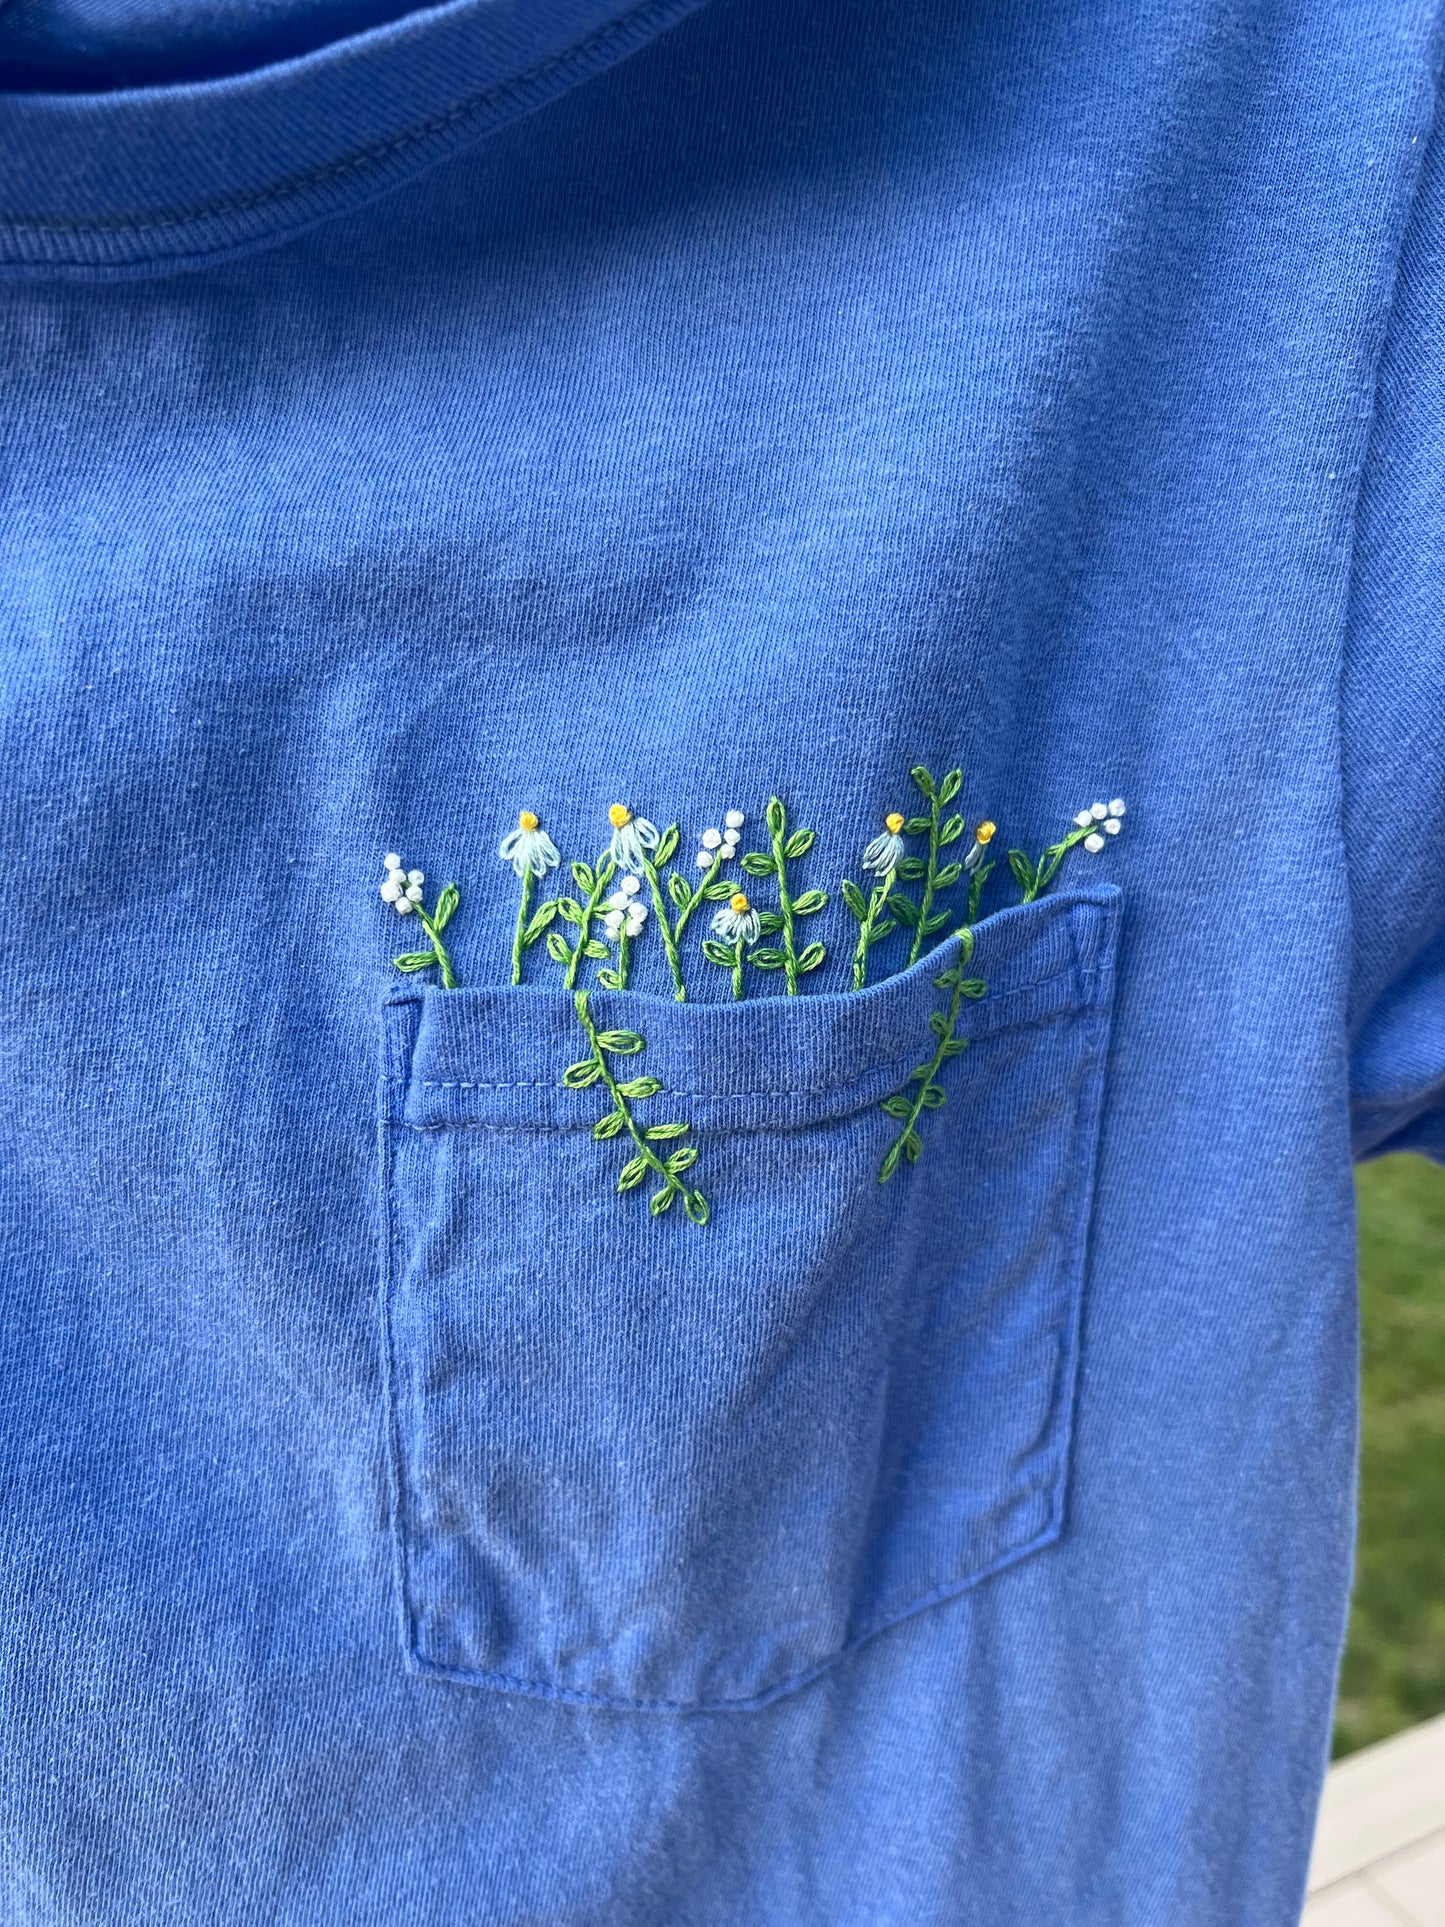 Pocket Full of Wildflowers Hand Embroidered Shirt